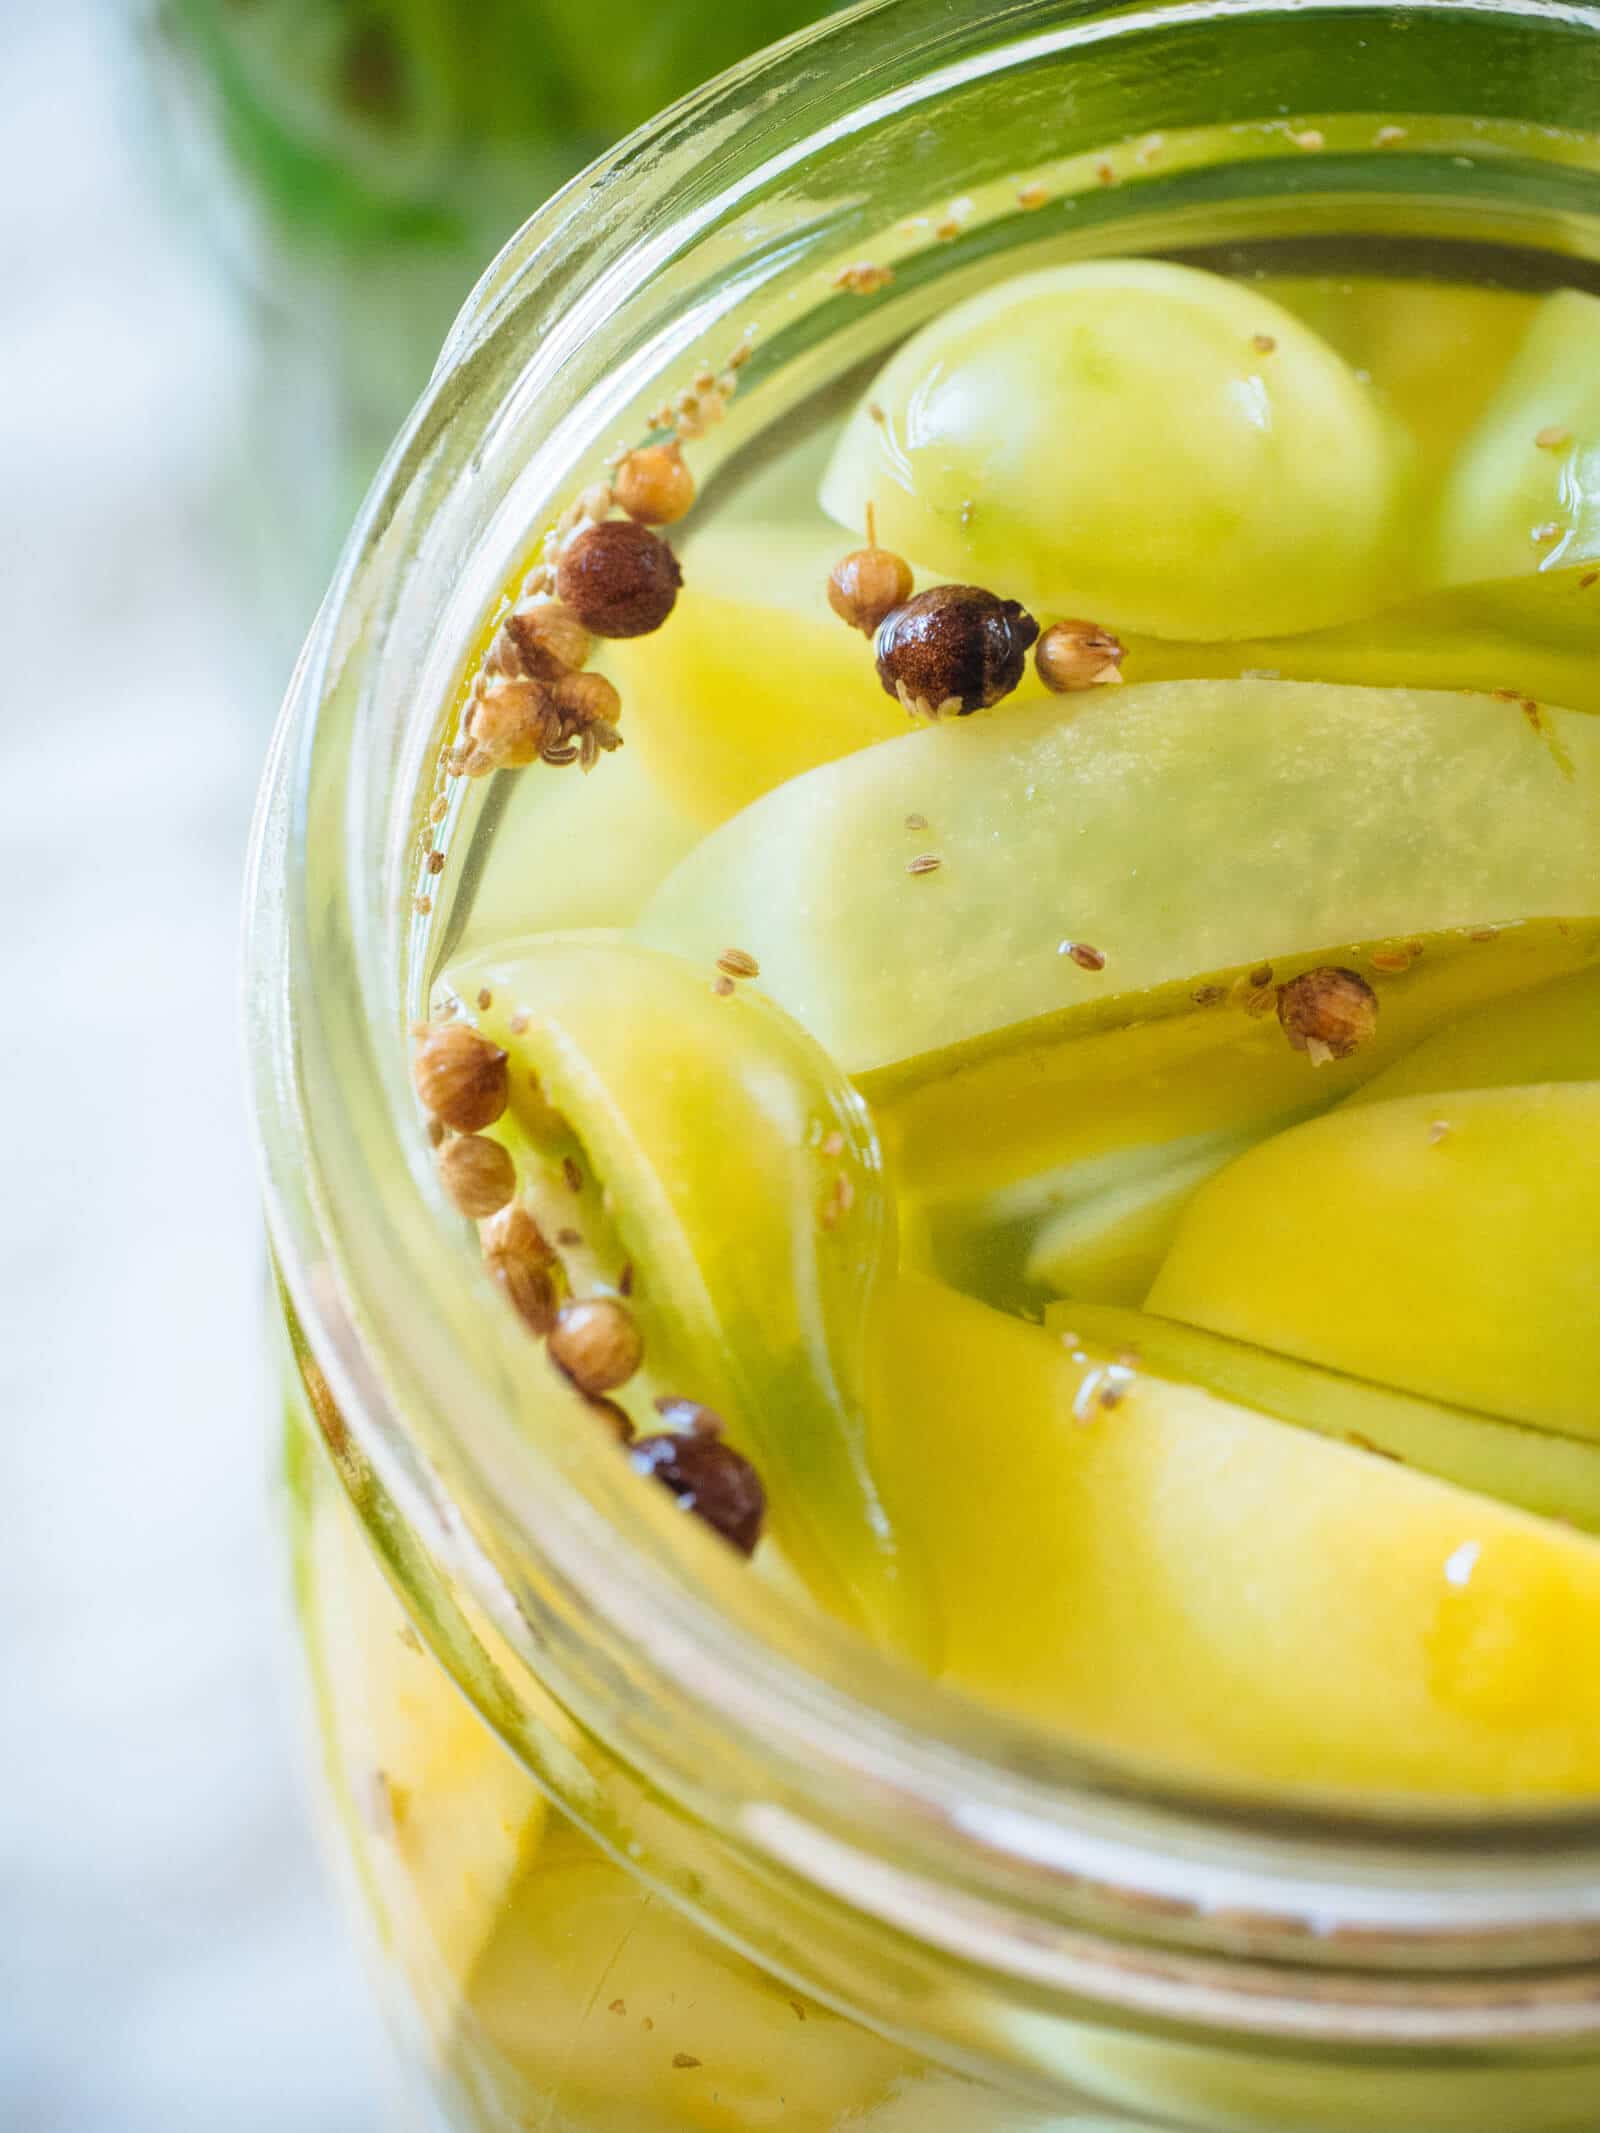 Pickled Green Tomatoes